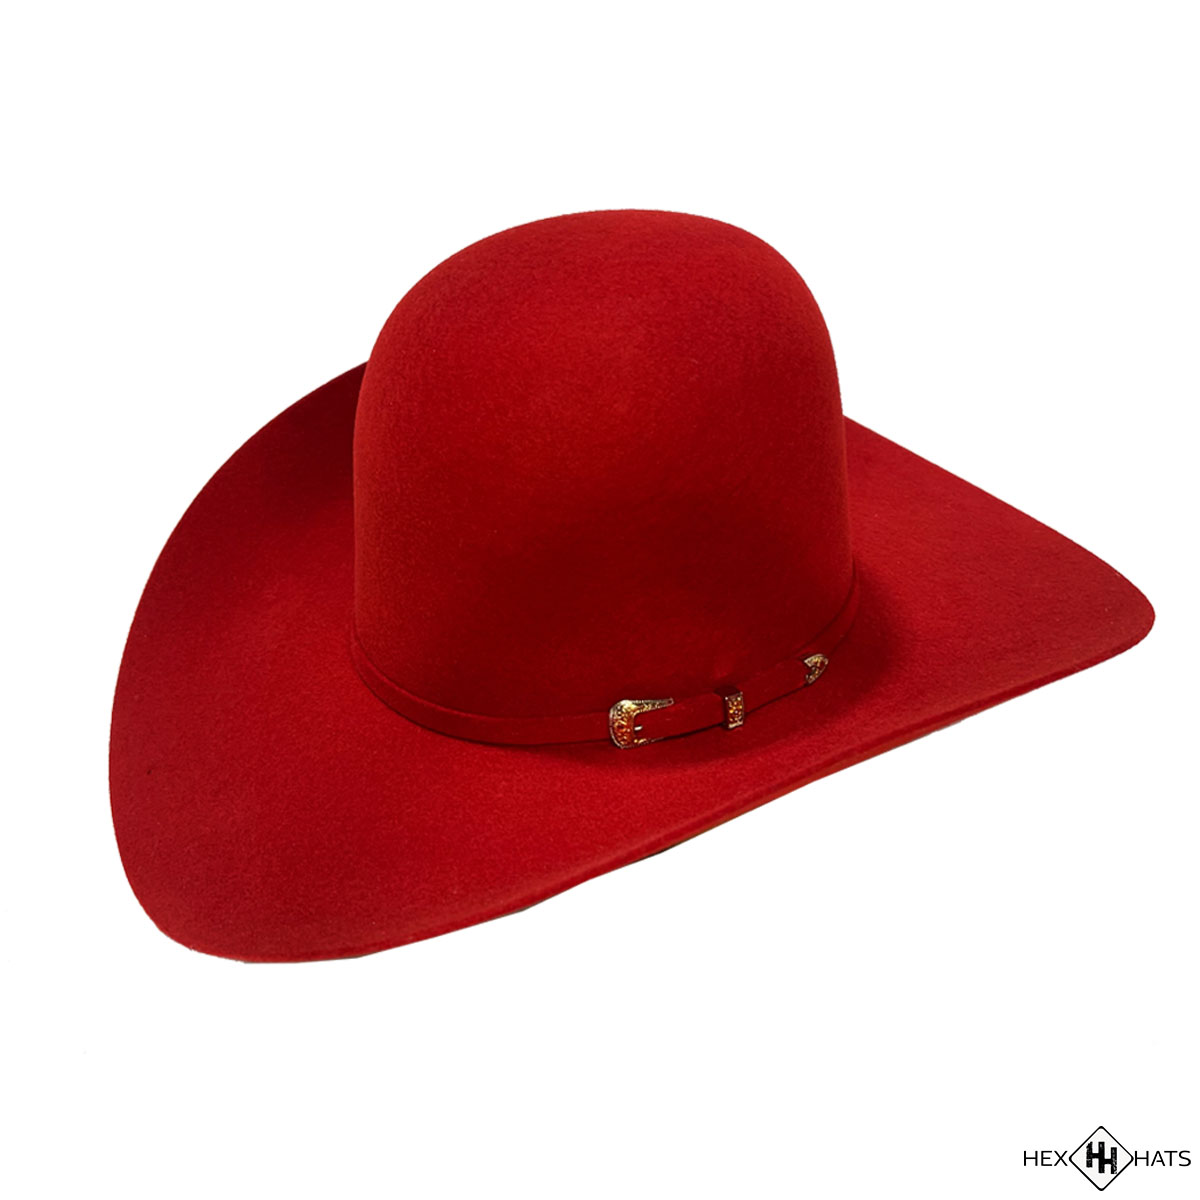 5x Toxic Red Cowboy Hat by Hex Hats Co.